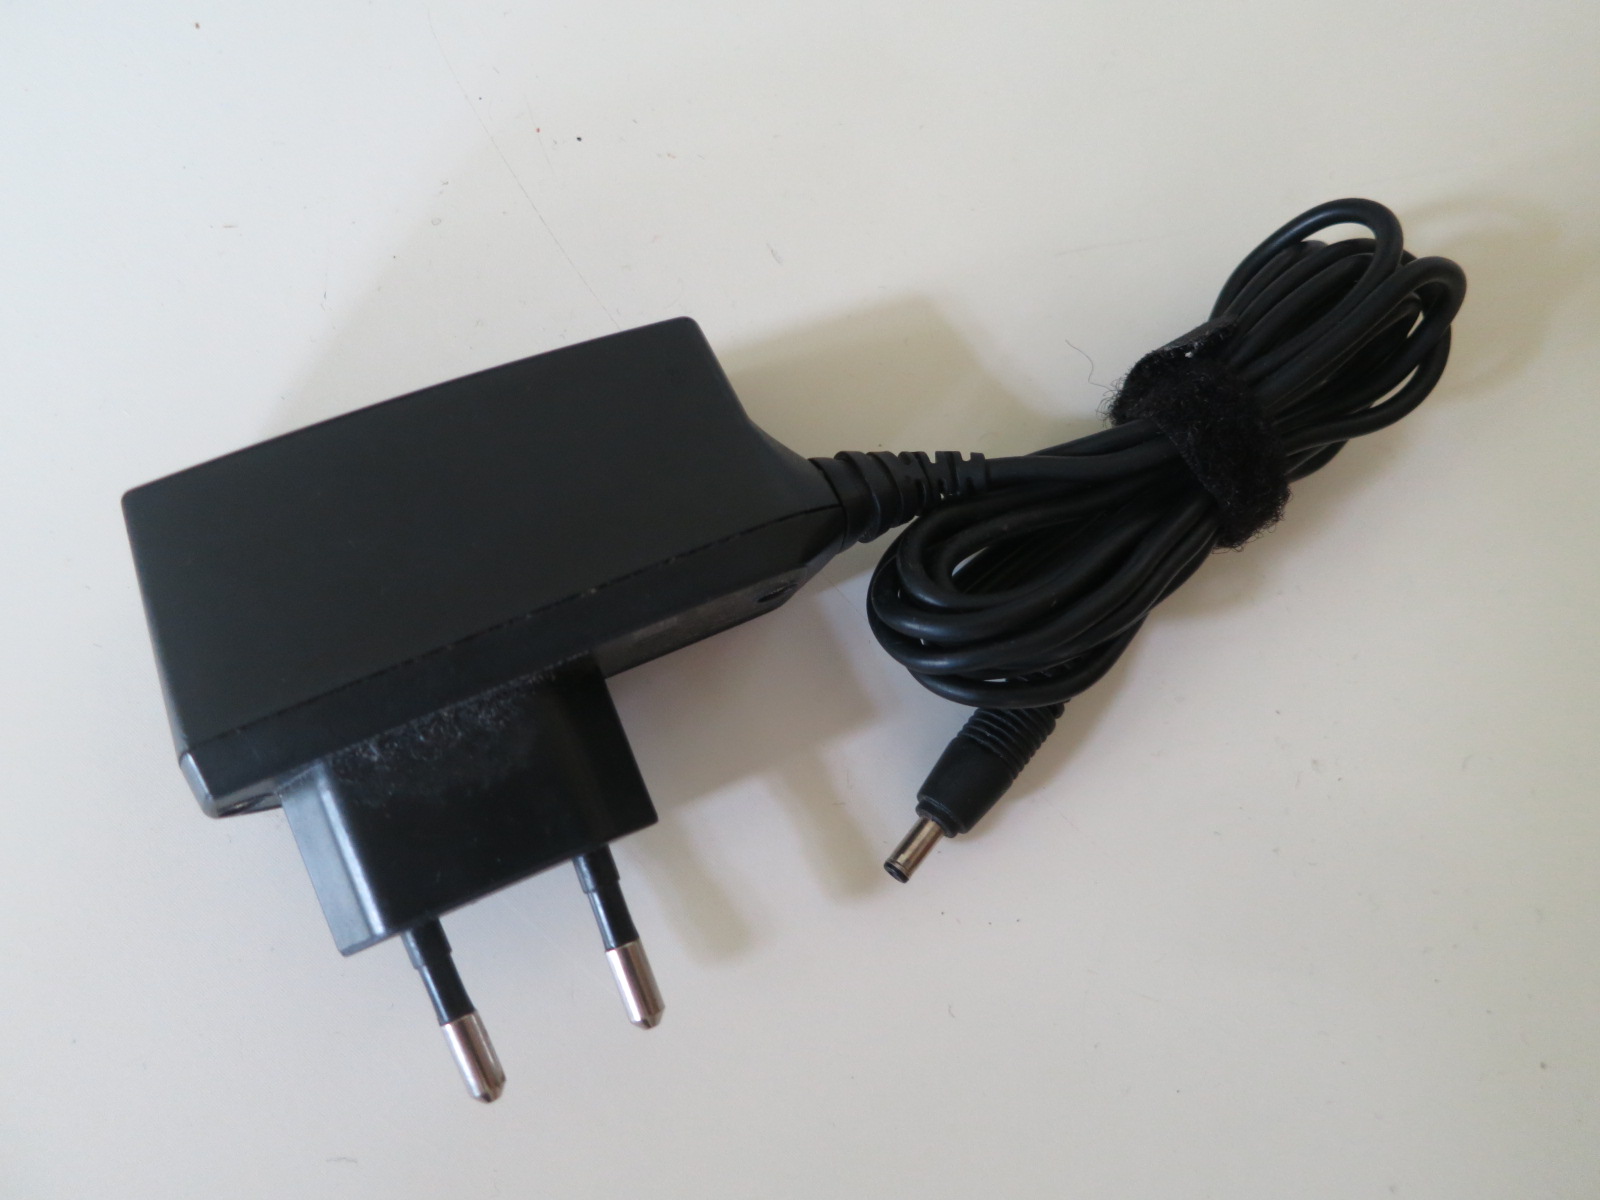 a pair of black electrical cords are plugged into an ac power strip